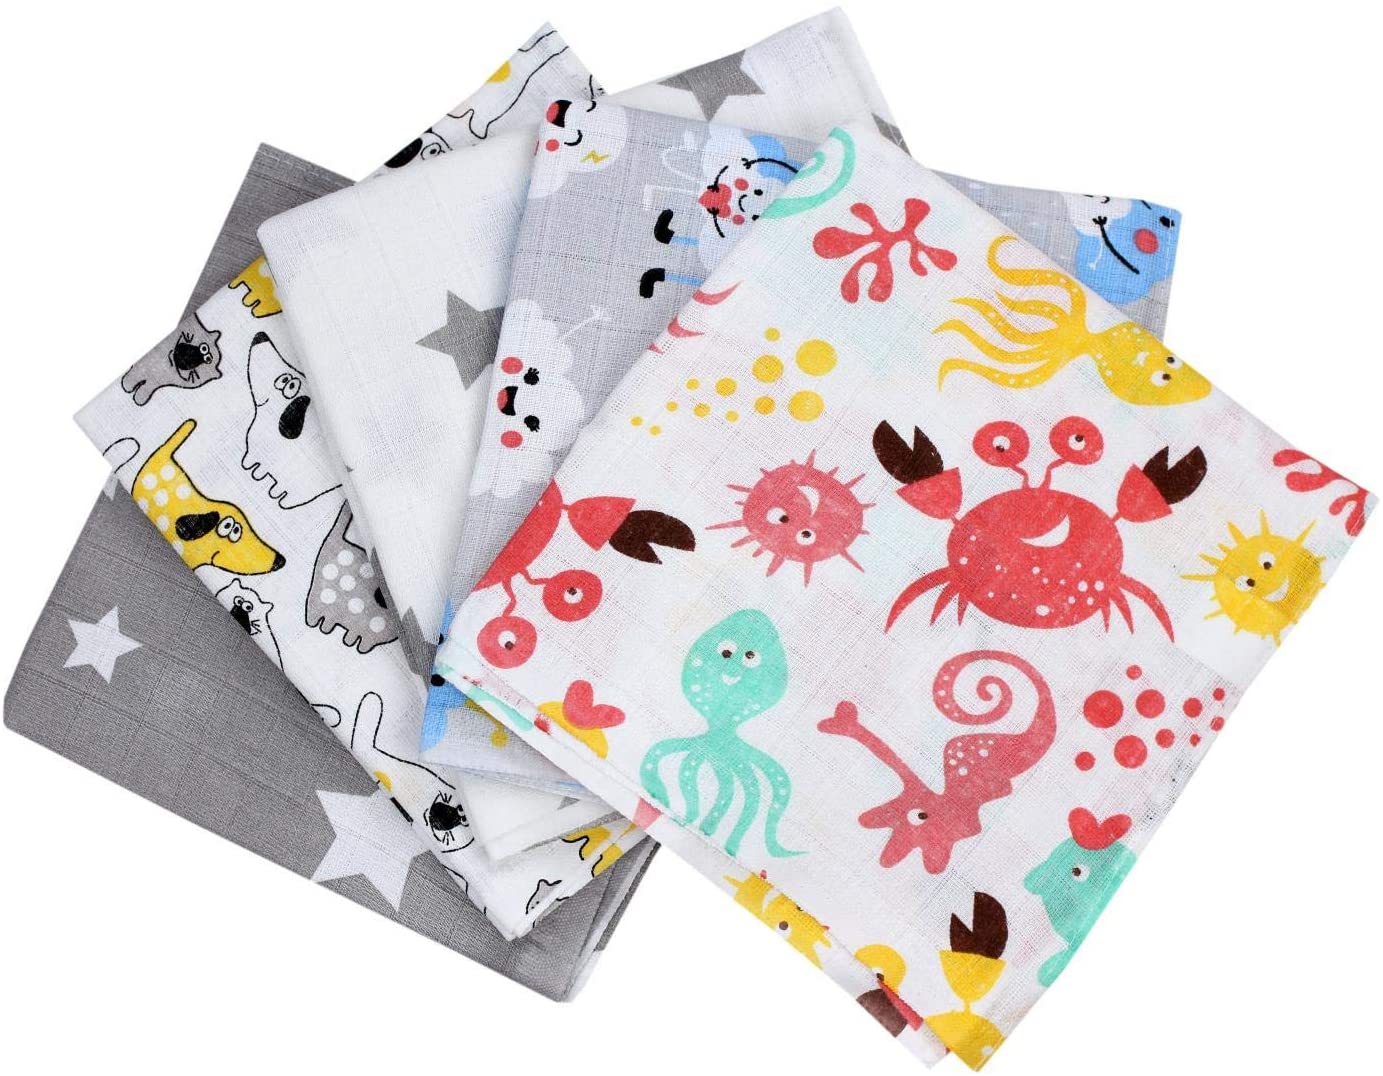 TupTam Baby Muslin Nappies Burp Cloths 70 x 80 cm Pack of 5 / 10 Colour Boy 5 Number of Pieces